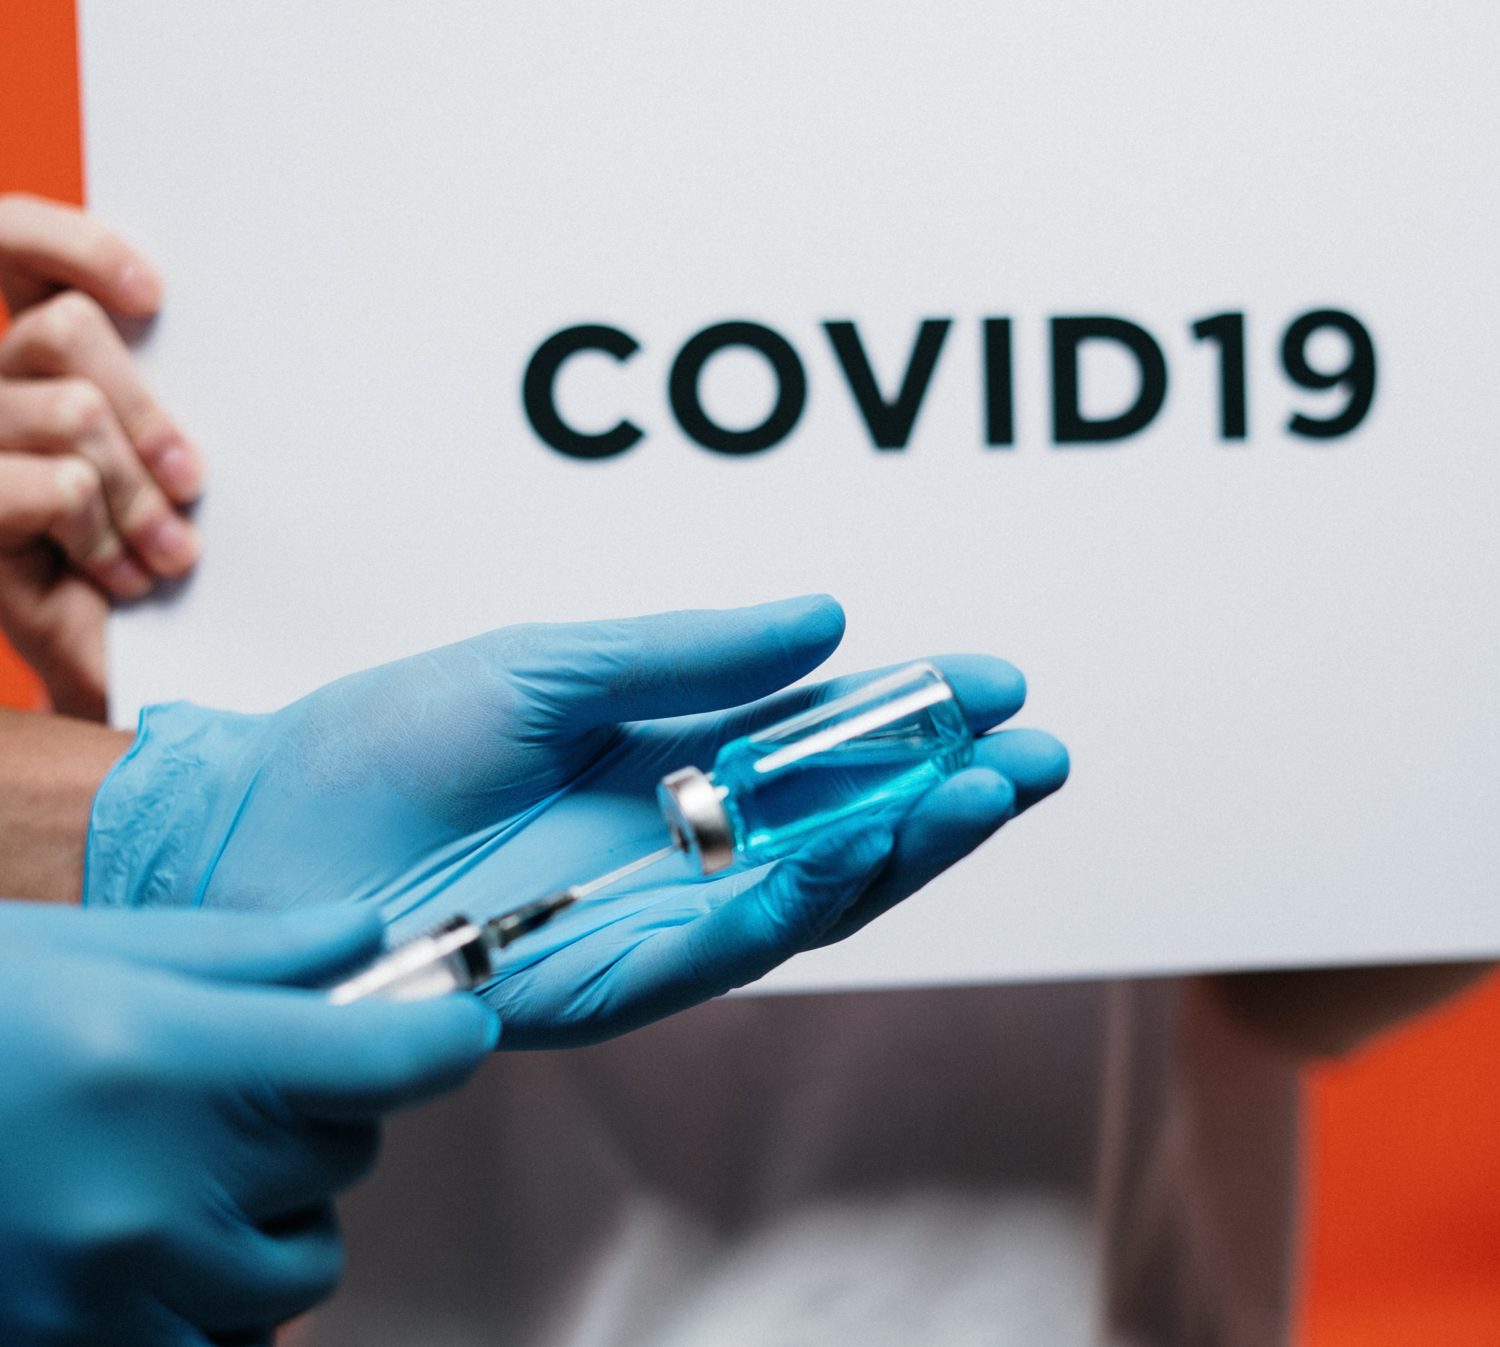 12-Available-COVID-19-Vaccine-Management-Solutions-to-Know-In-Depth-1